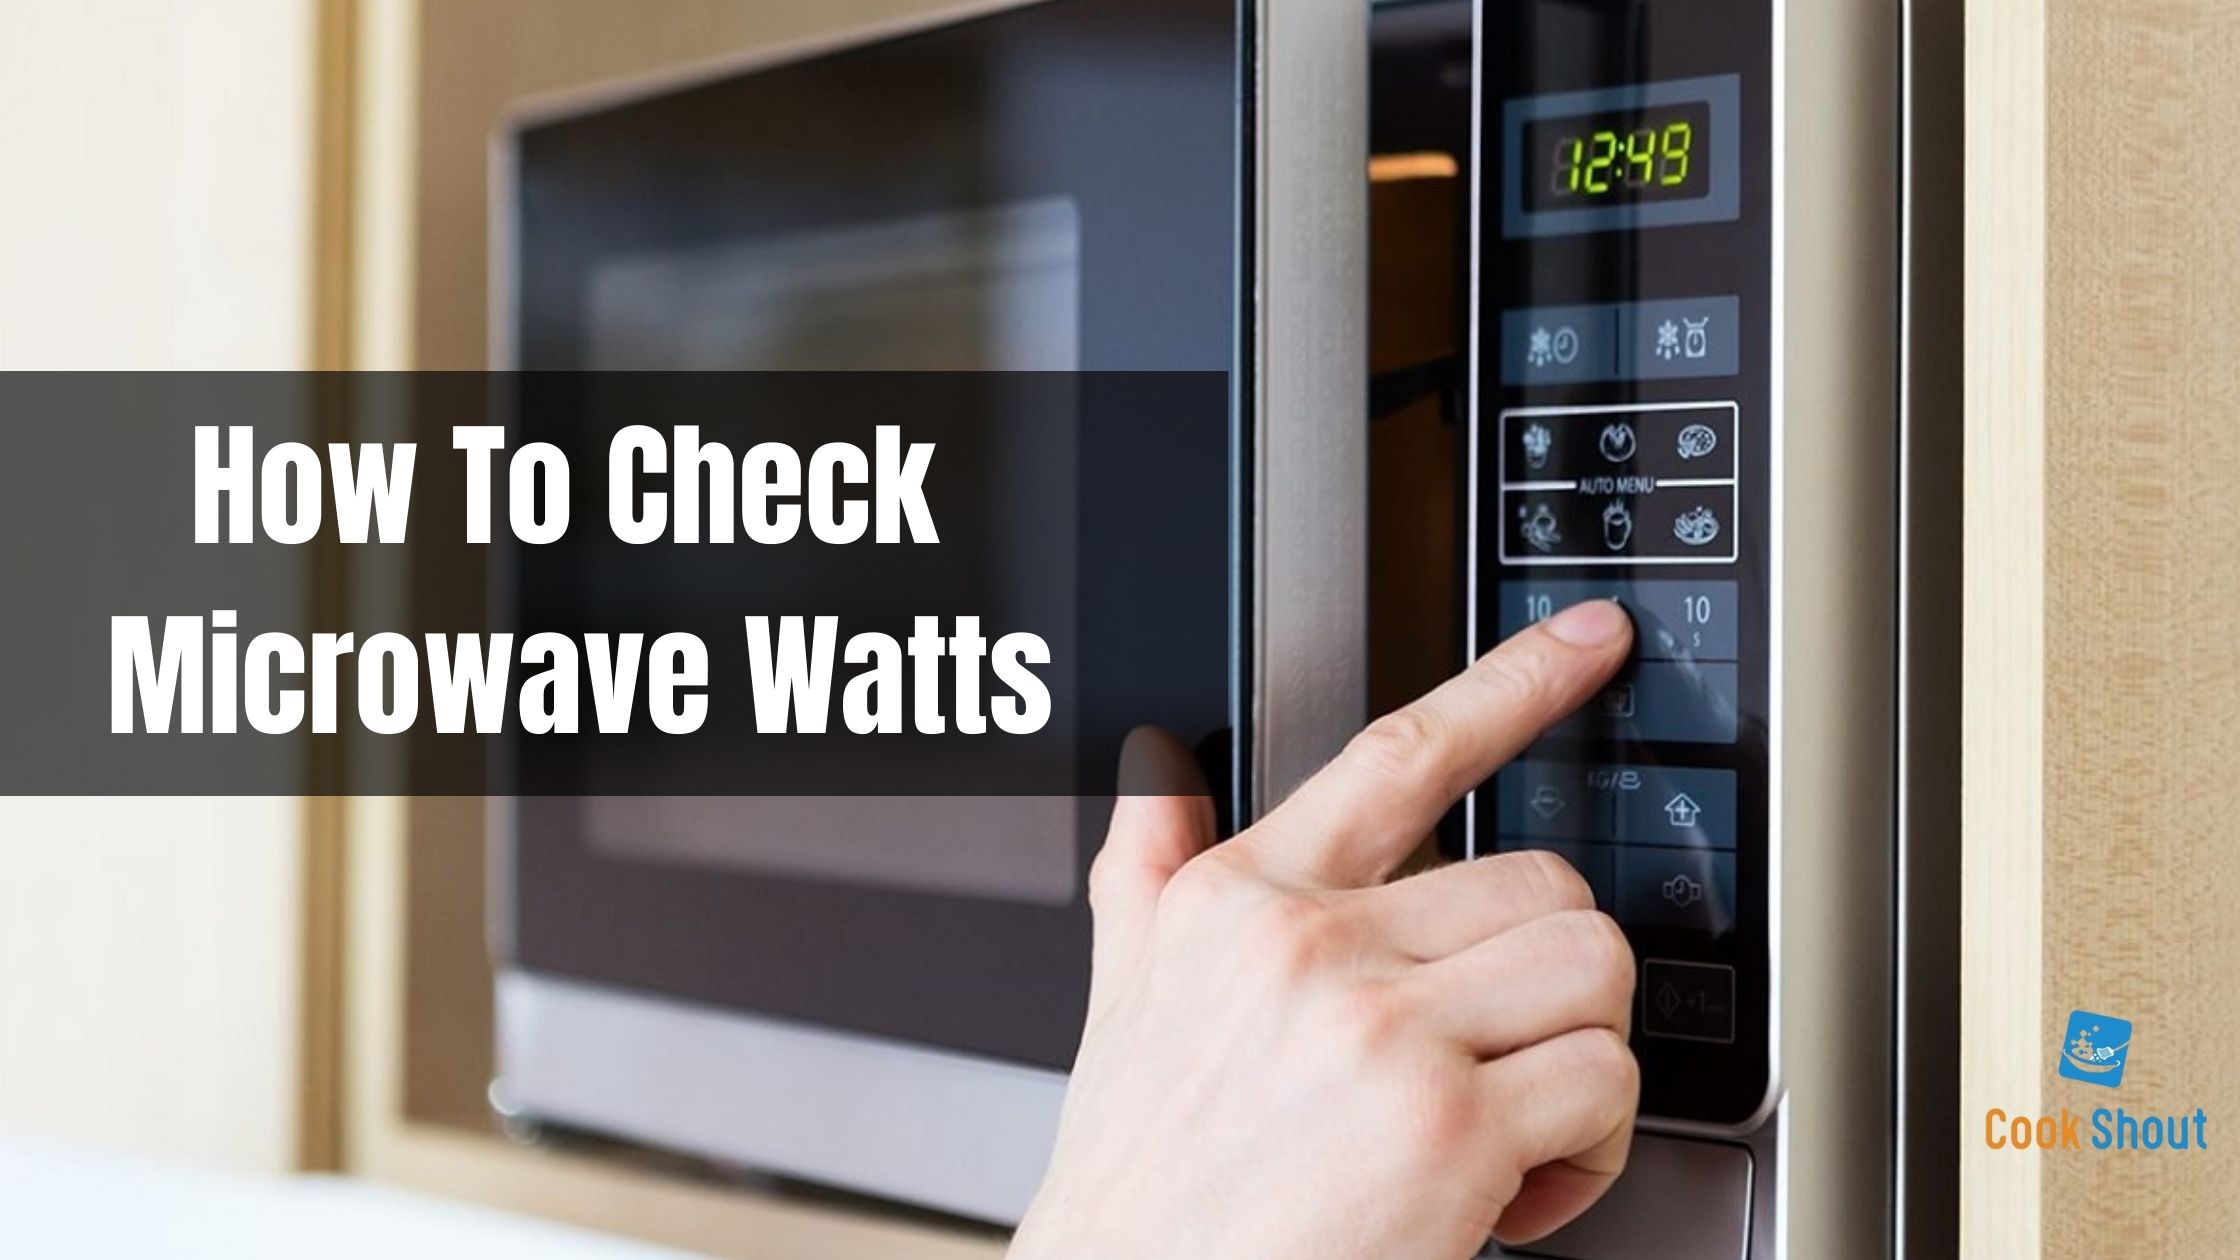 How To Check Microwave Watts